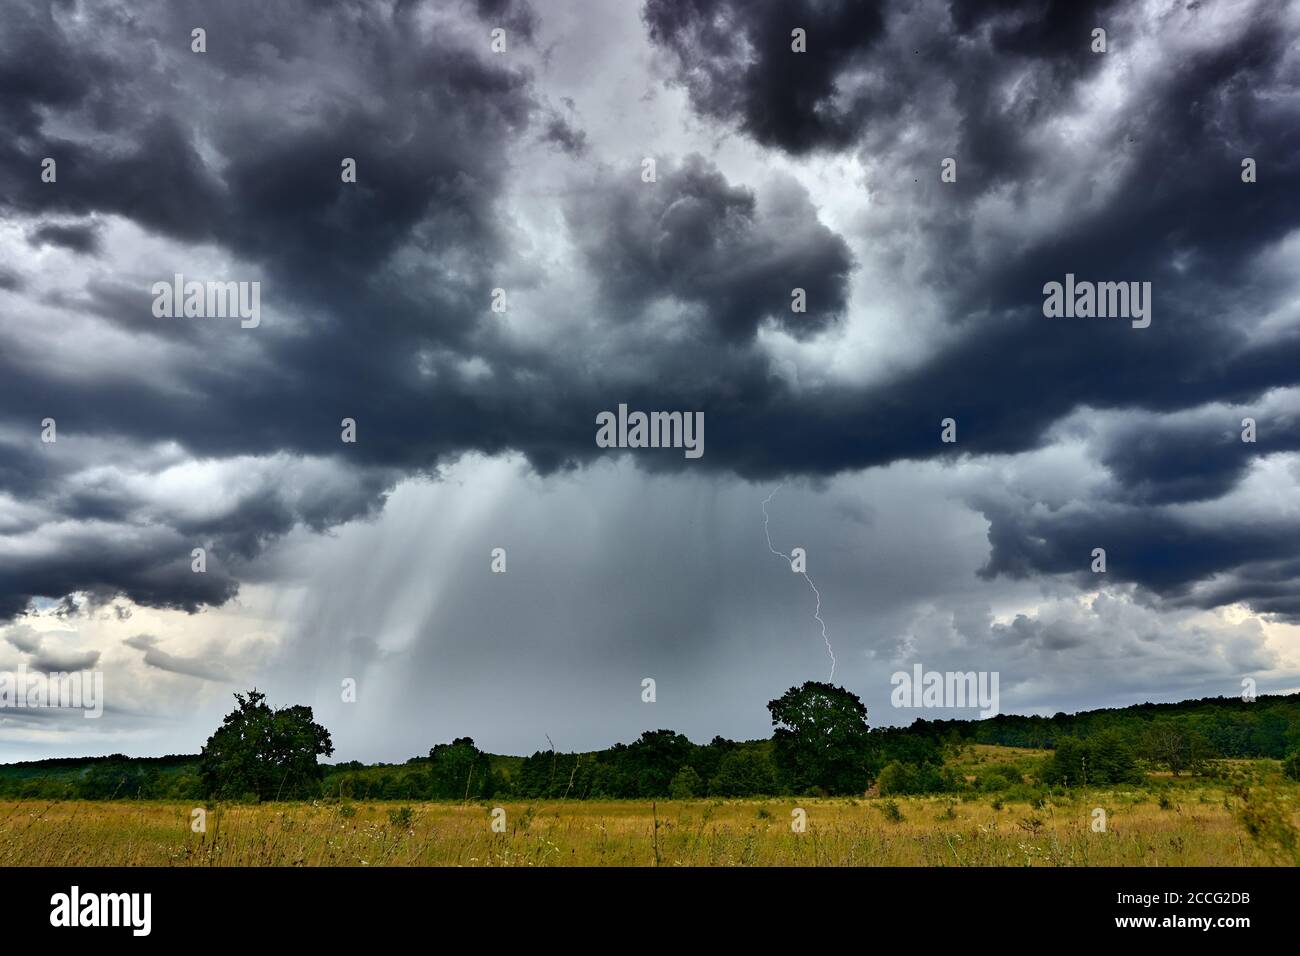 Landscape with forest and stormy skies with heavy rain Stock Photo